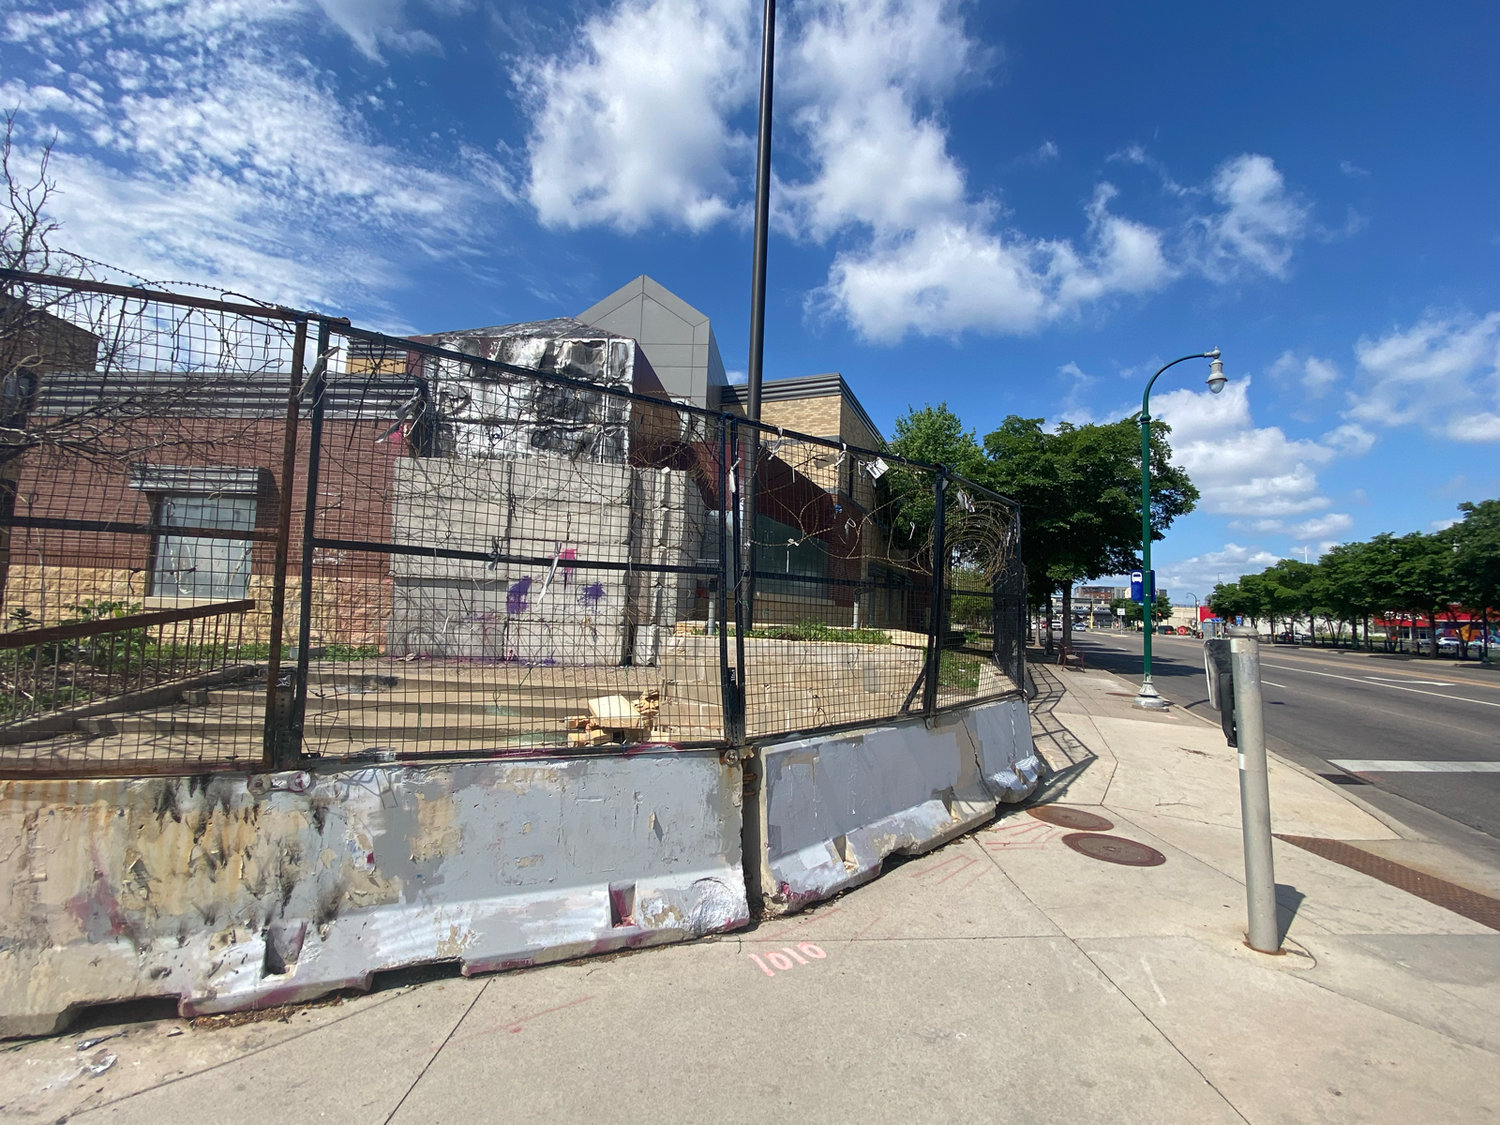 The 3rd Precinct remains boarded and blocked with barb wire two years later. It still smells of burnt items as passersby walk down the sidewalk. The sidewalk is still only partially open.